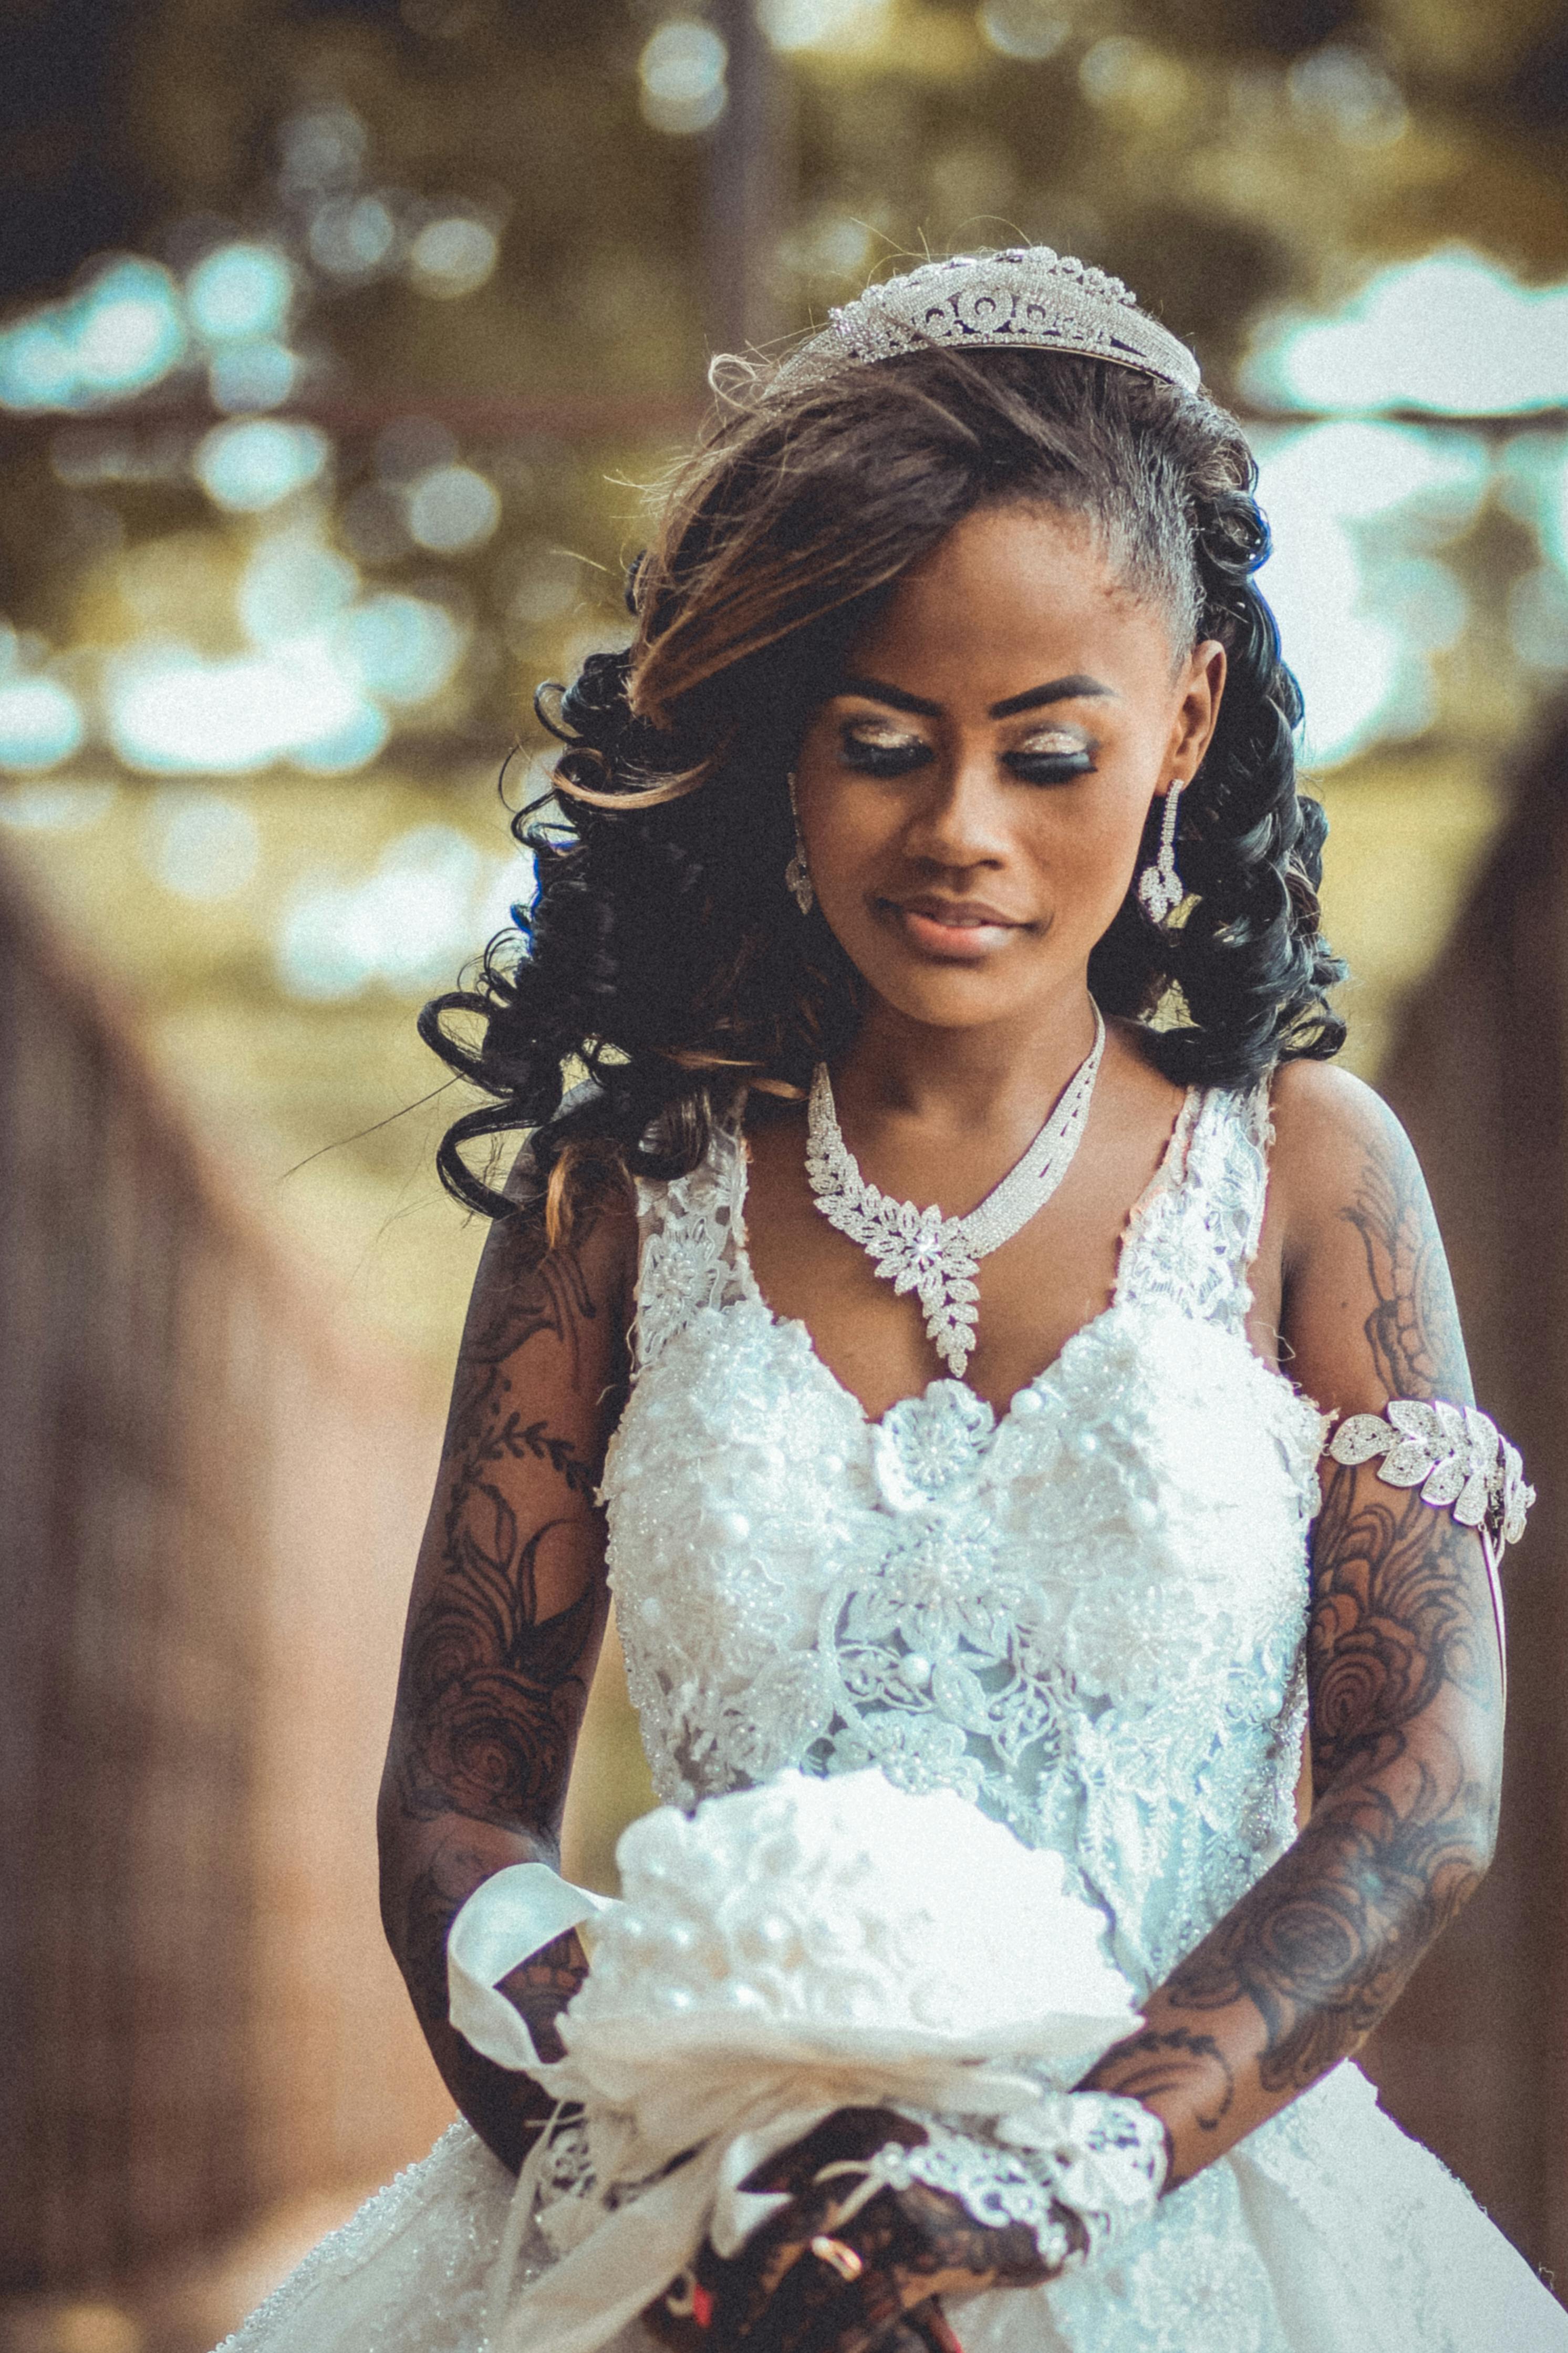 The Best Wedding Dresses for Tattooed Brides  The Wedding Shoppe